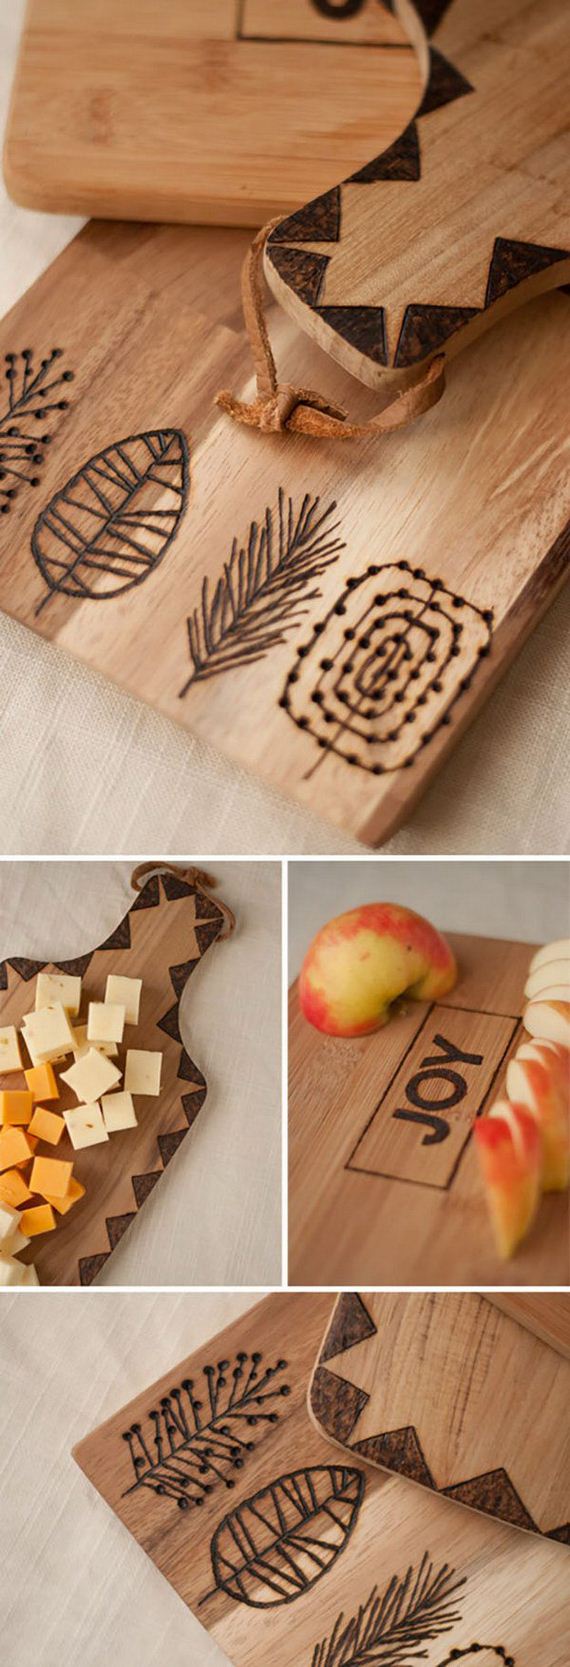 07-diy-personalized-gift-ideas